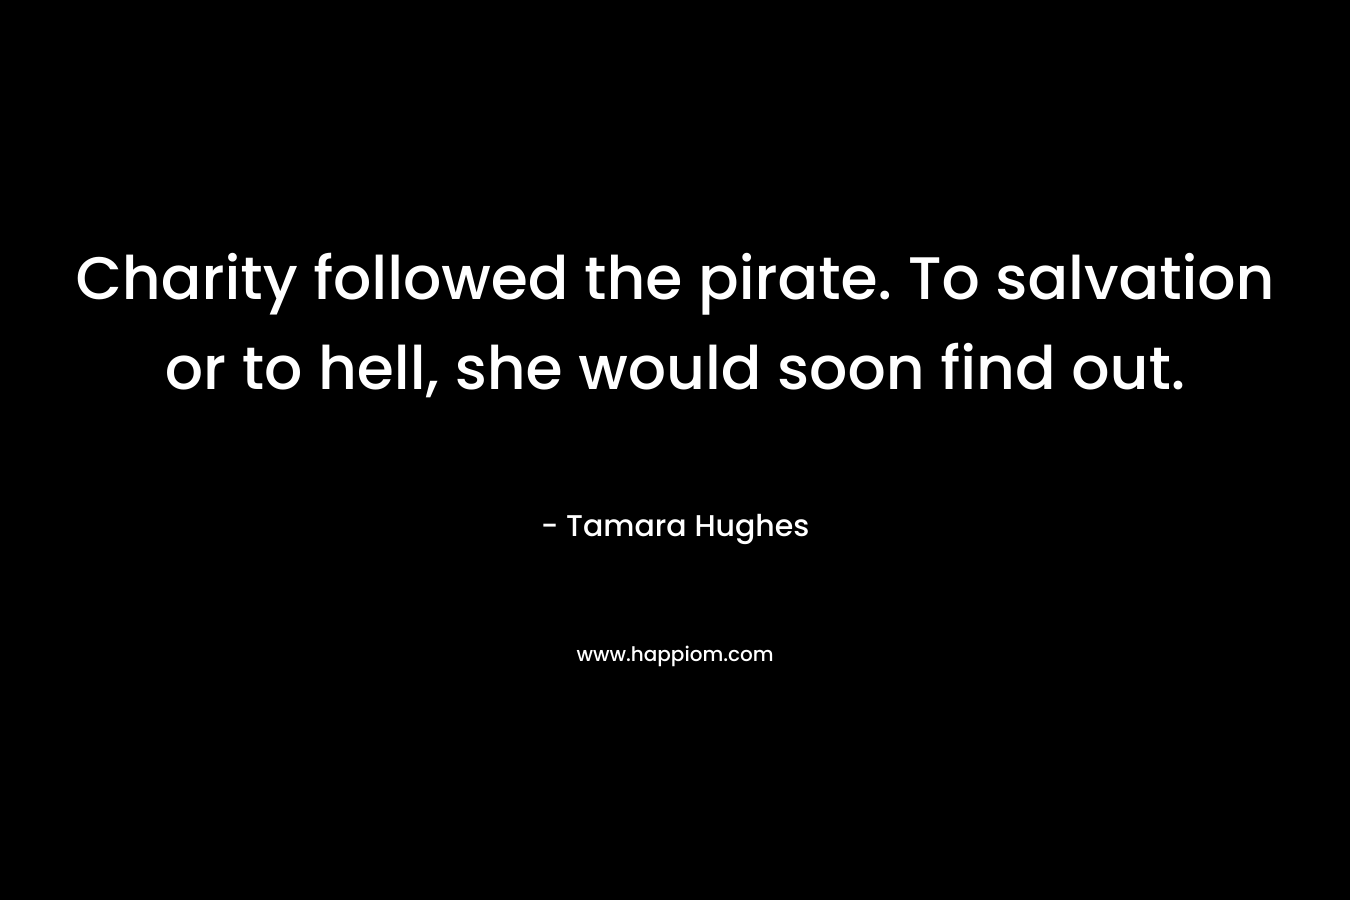 Charity followed the pirate. To salvation or to hell, she would soon find out. – Tamara Hughes